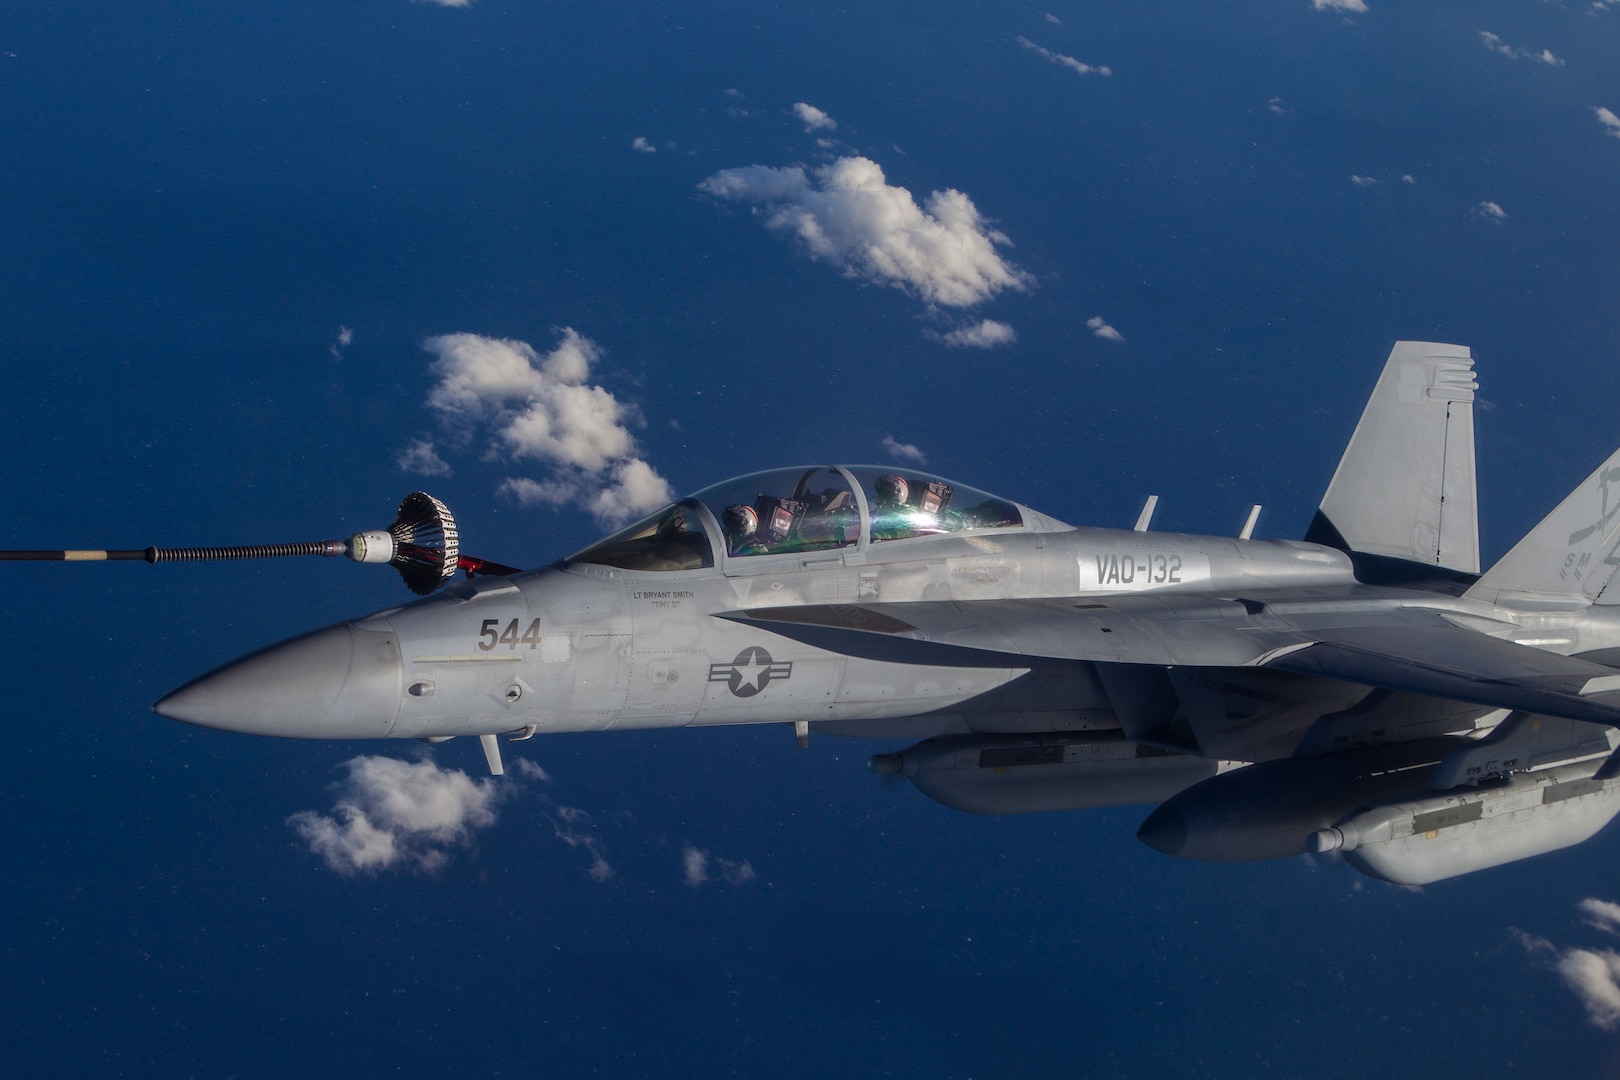 United States Navy EA-18G Growler from VAQ-132 "Scorpion" Squadron conducts Air to Air refuelling operations with an RAAF KC-30 Multi Role Tanker Transport aircraft from No 33 Squadron. RAAF Base Amberley is the main operating base for RAAF and United States aircraft activities during Talisman Saber 2017. (Royal Australian Air Force photo by Sgt. Peter Borys)